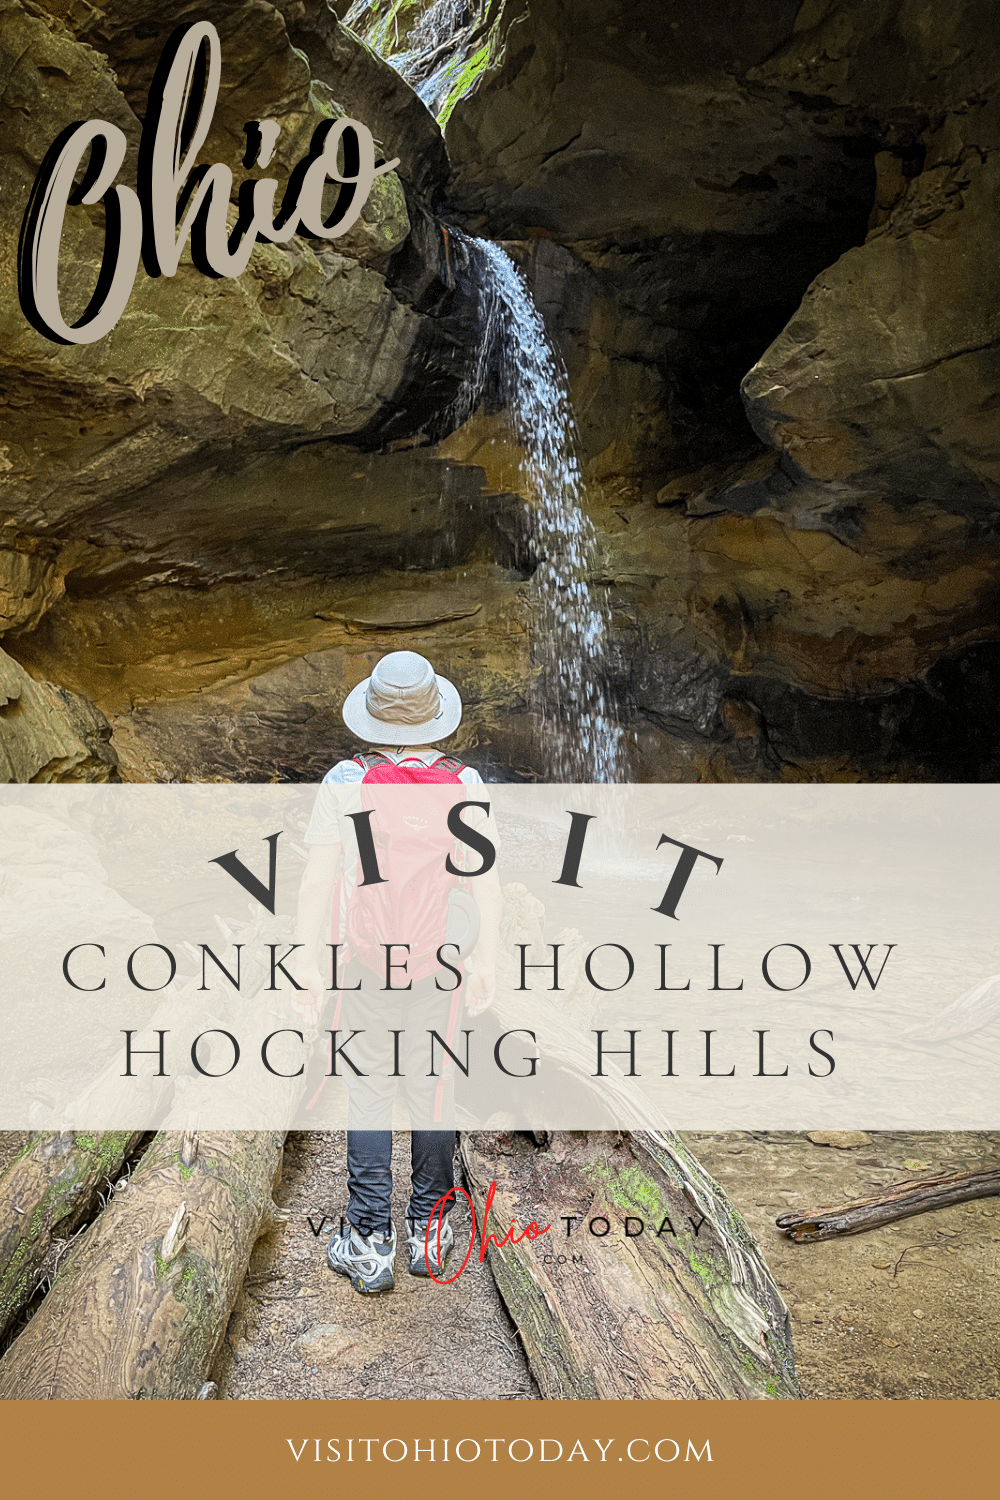 Conkles Hollow is a State Nature Preserve located in Hocking Hills. Conkles Hollow features a rocky gorge with a beautiful valley floor.  | Visit Ohio Today | Hocking Hills | Conkles Hollow | Lower Trail | Ohio Hiking